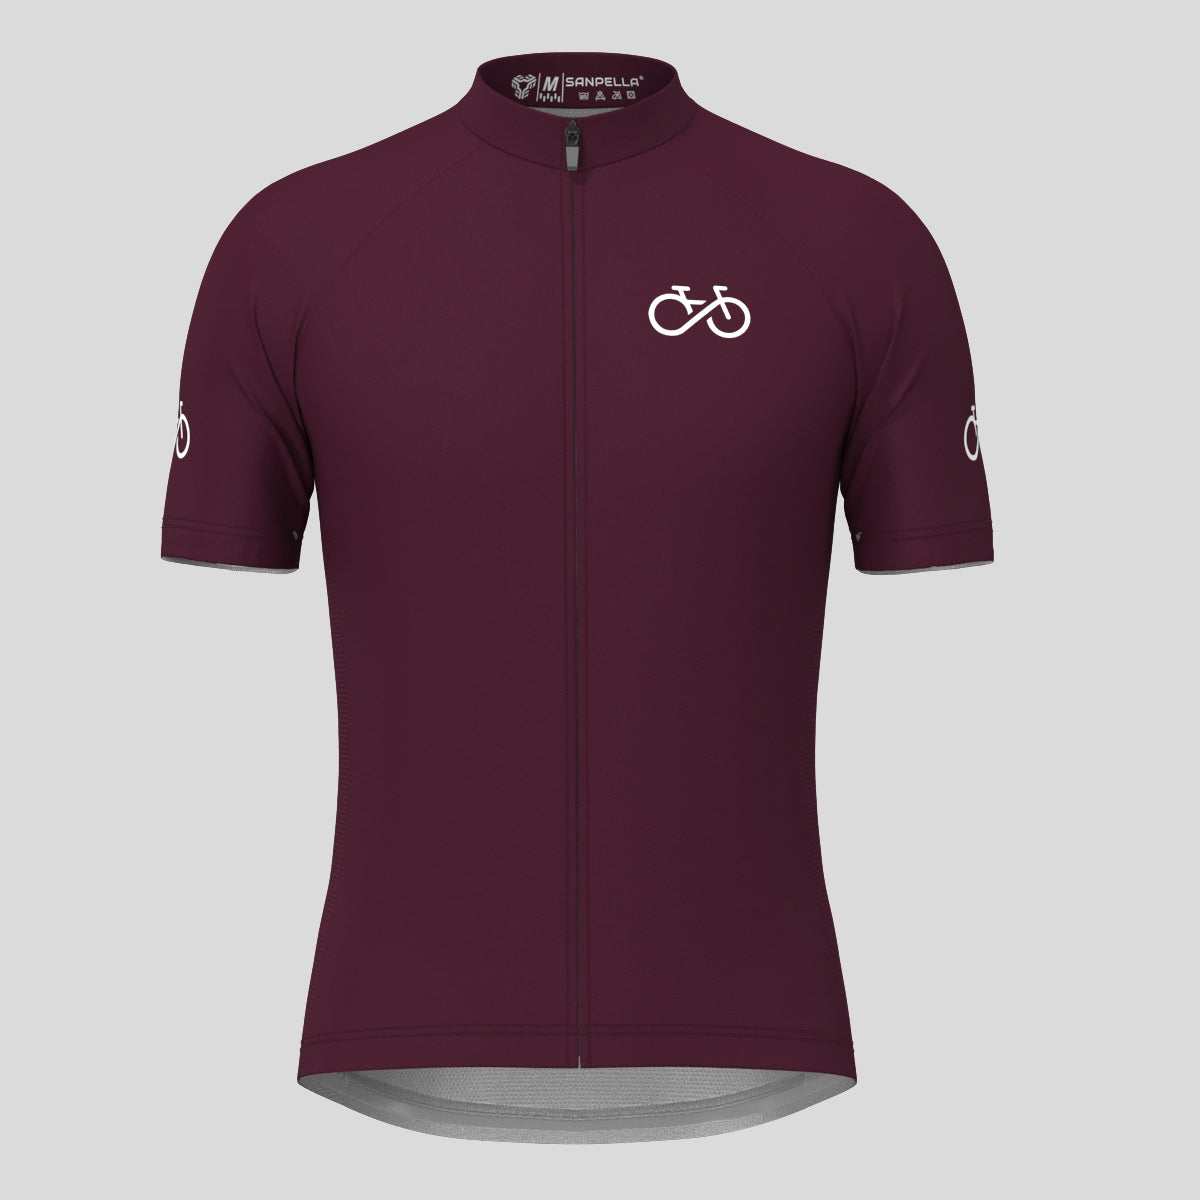 Ride Forever Men's Cycling Jersey -Burgundy